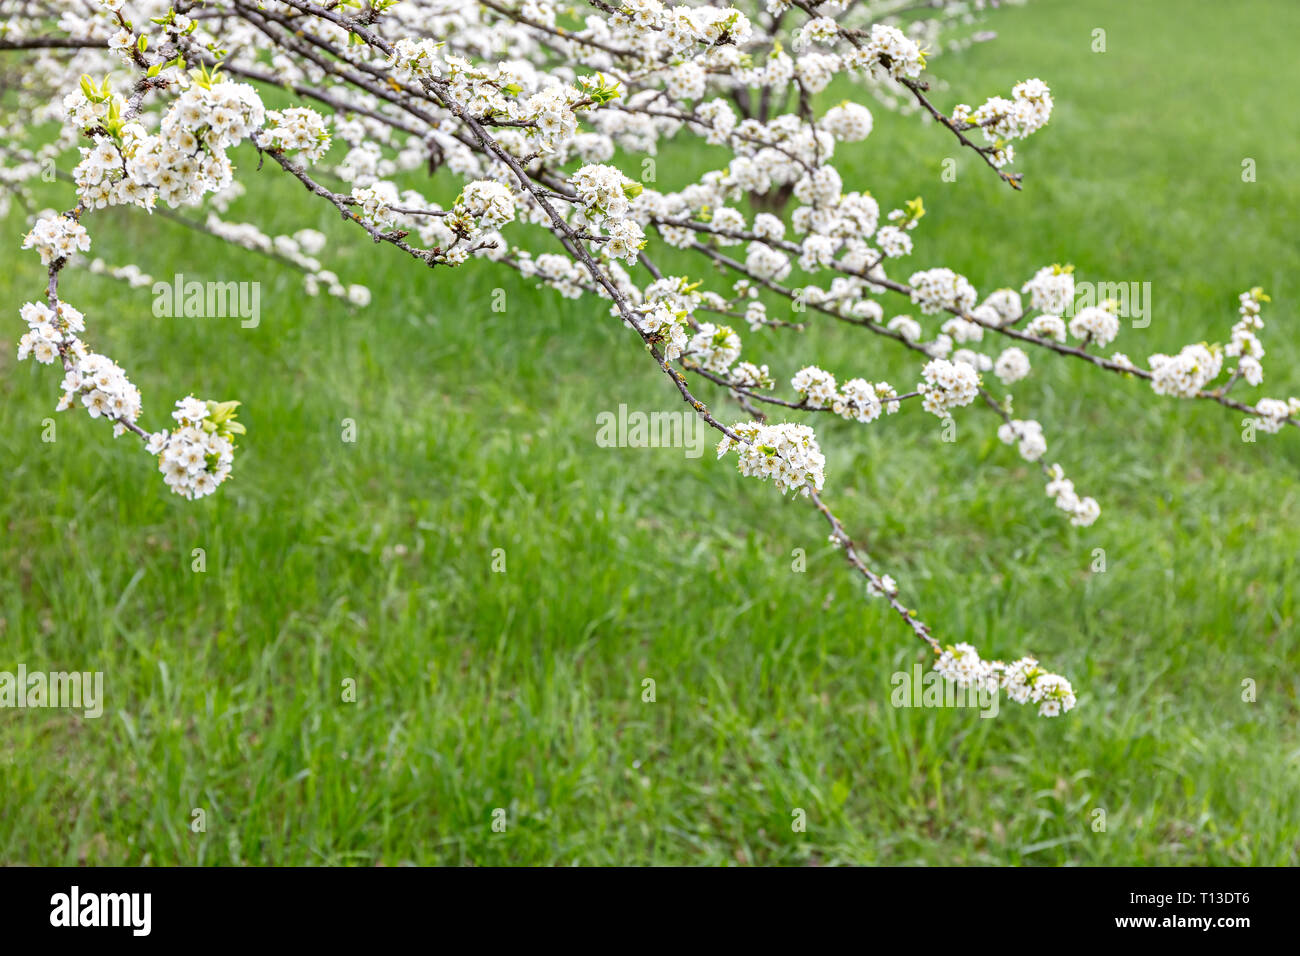 branch of cherry tree with flowers against green grass background Stock Photo